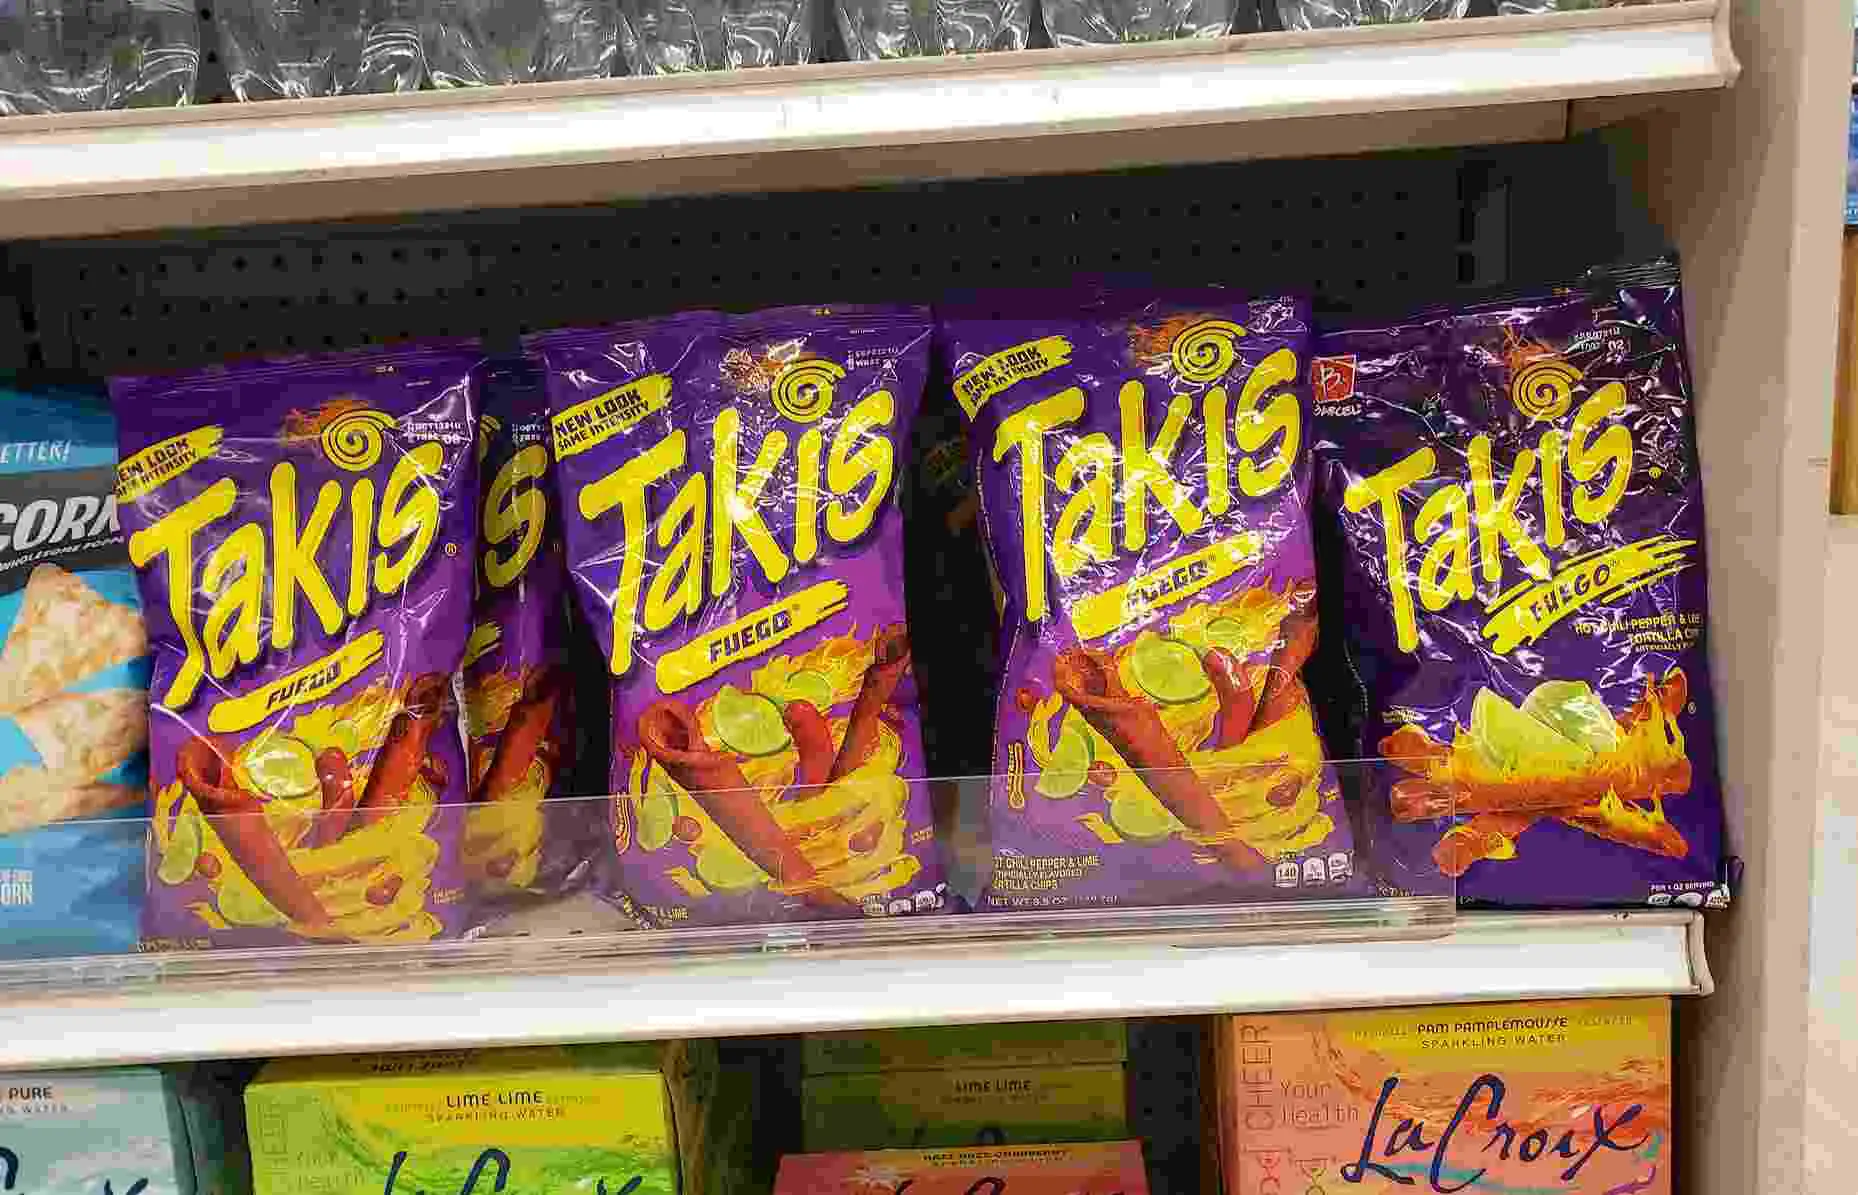 Some Takis chips in the super shop.